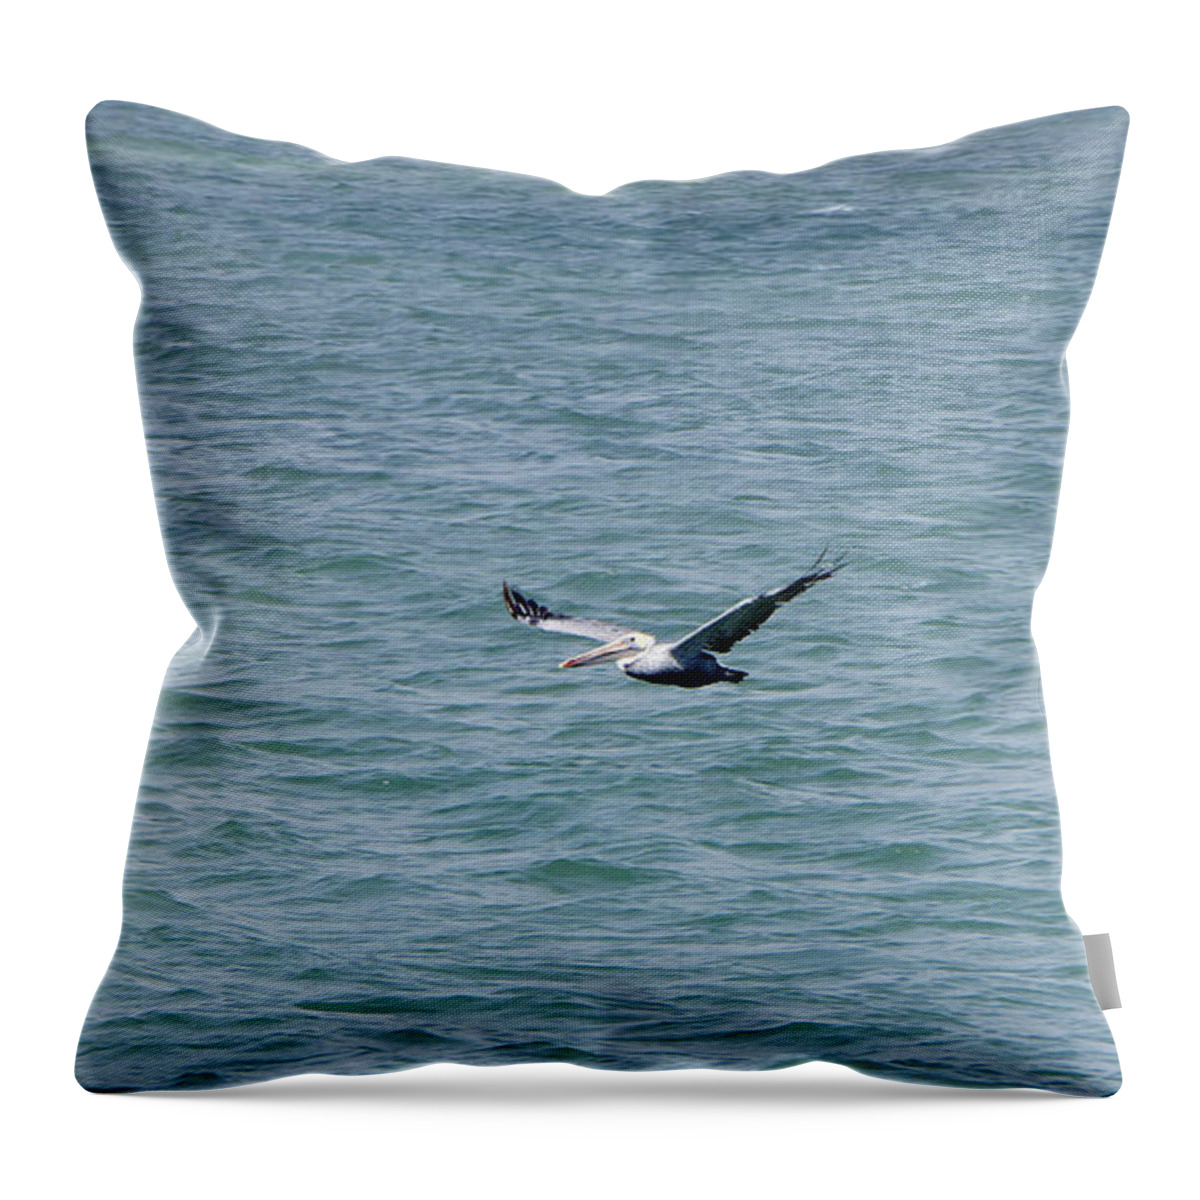 Richard Reeve Throw Pillow featuring the photograph Pelican Flight by Richard Reeve